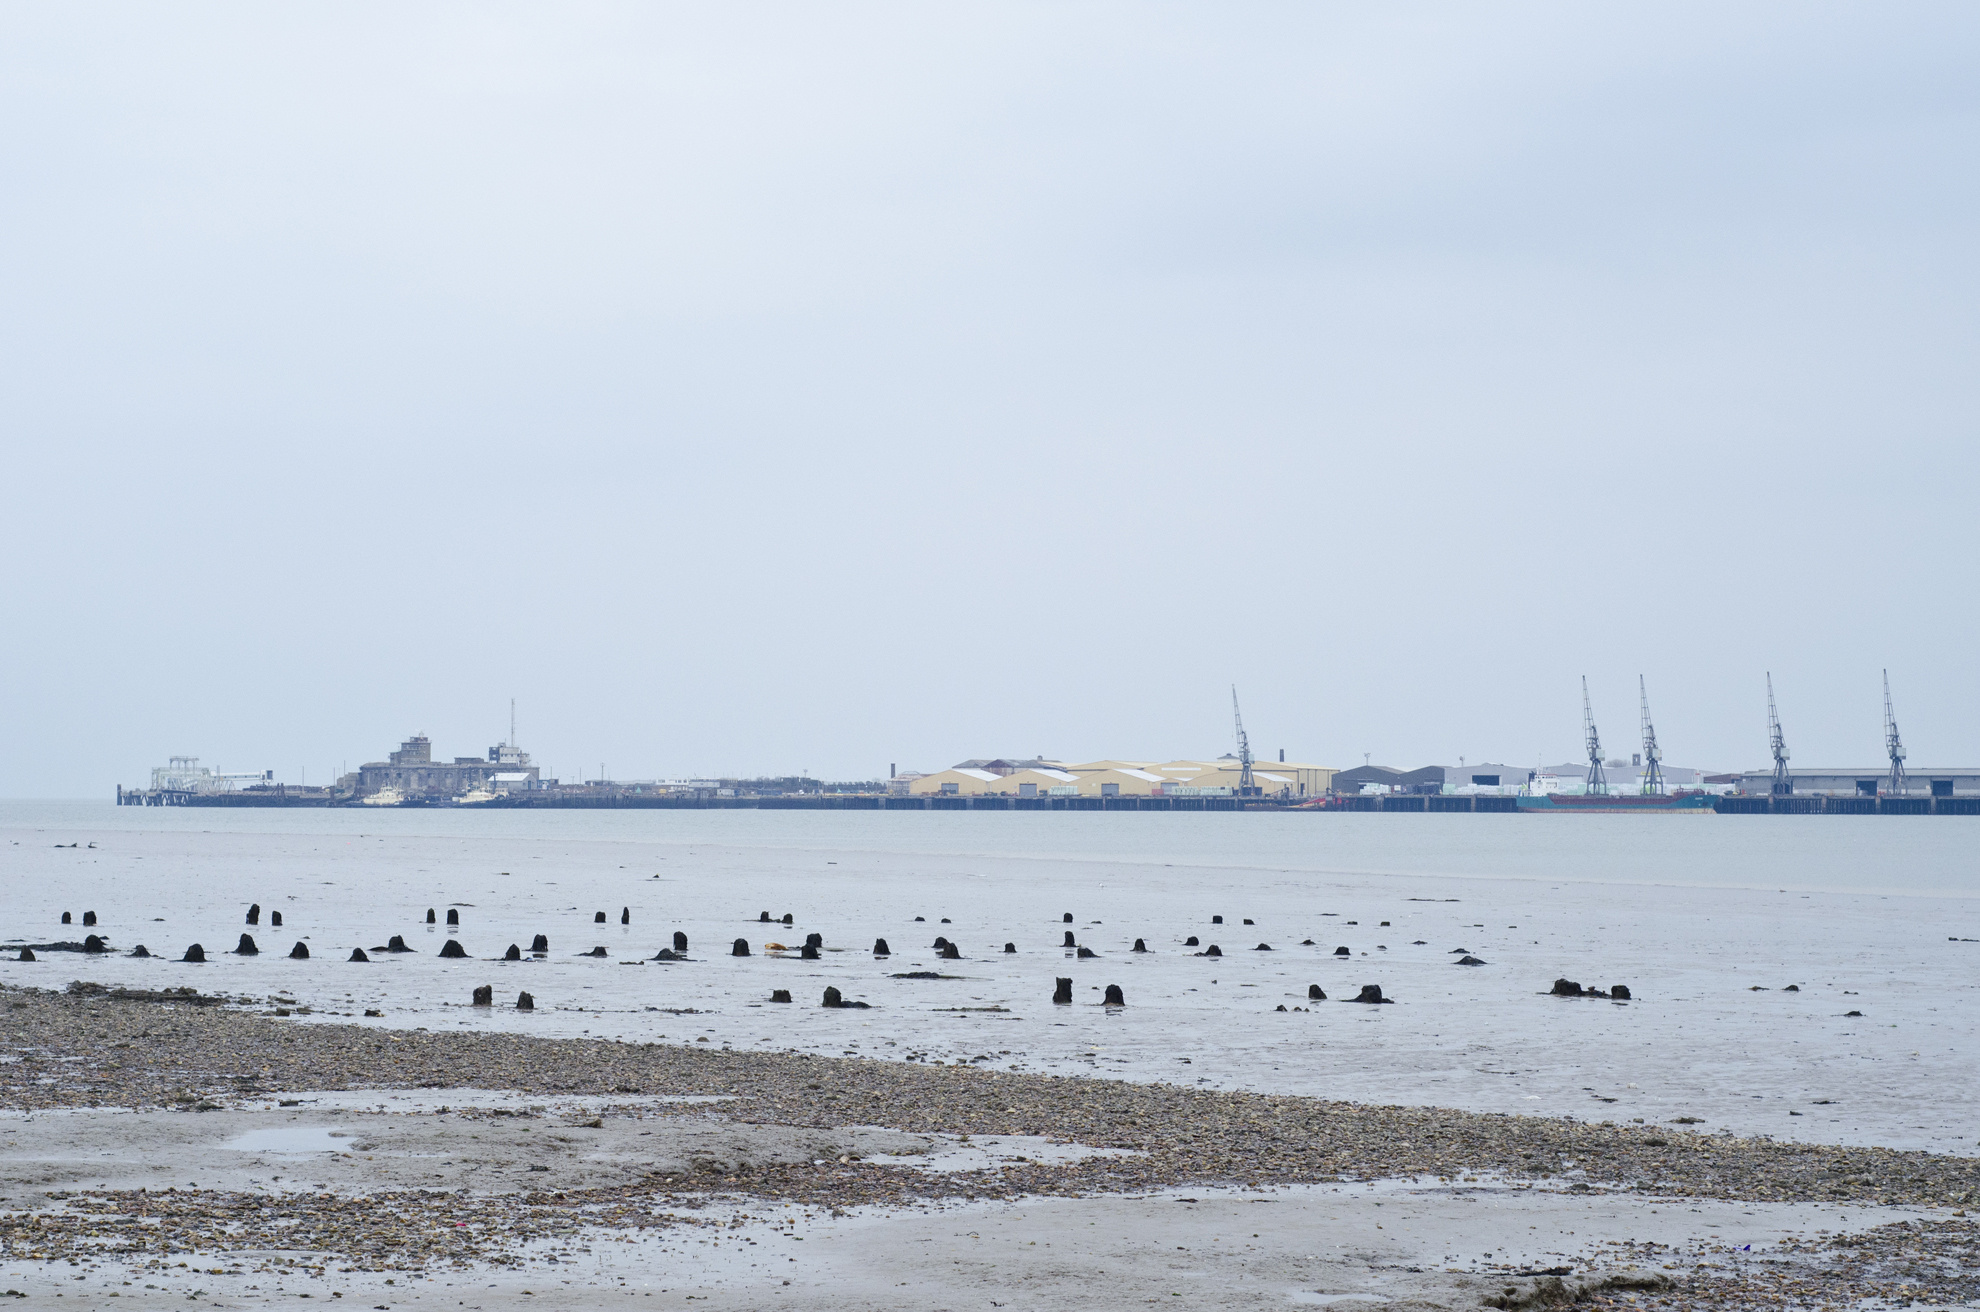 View of Sheppey from the Isle of Grain. Photograph: Matthew de Pulford, 2016